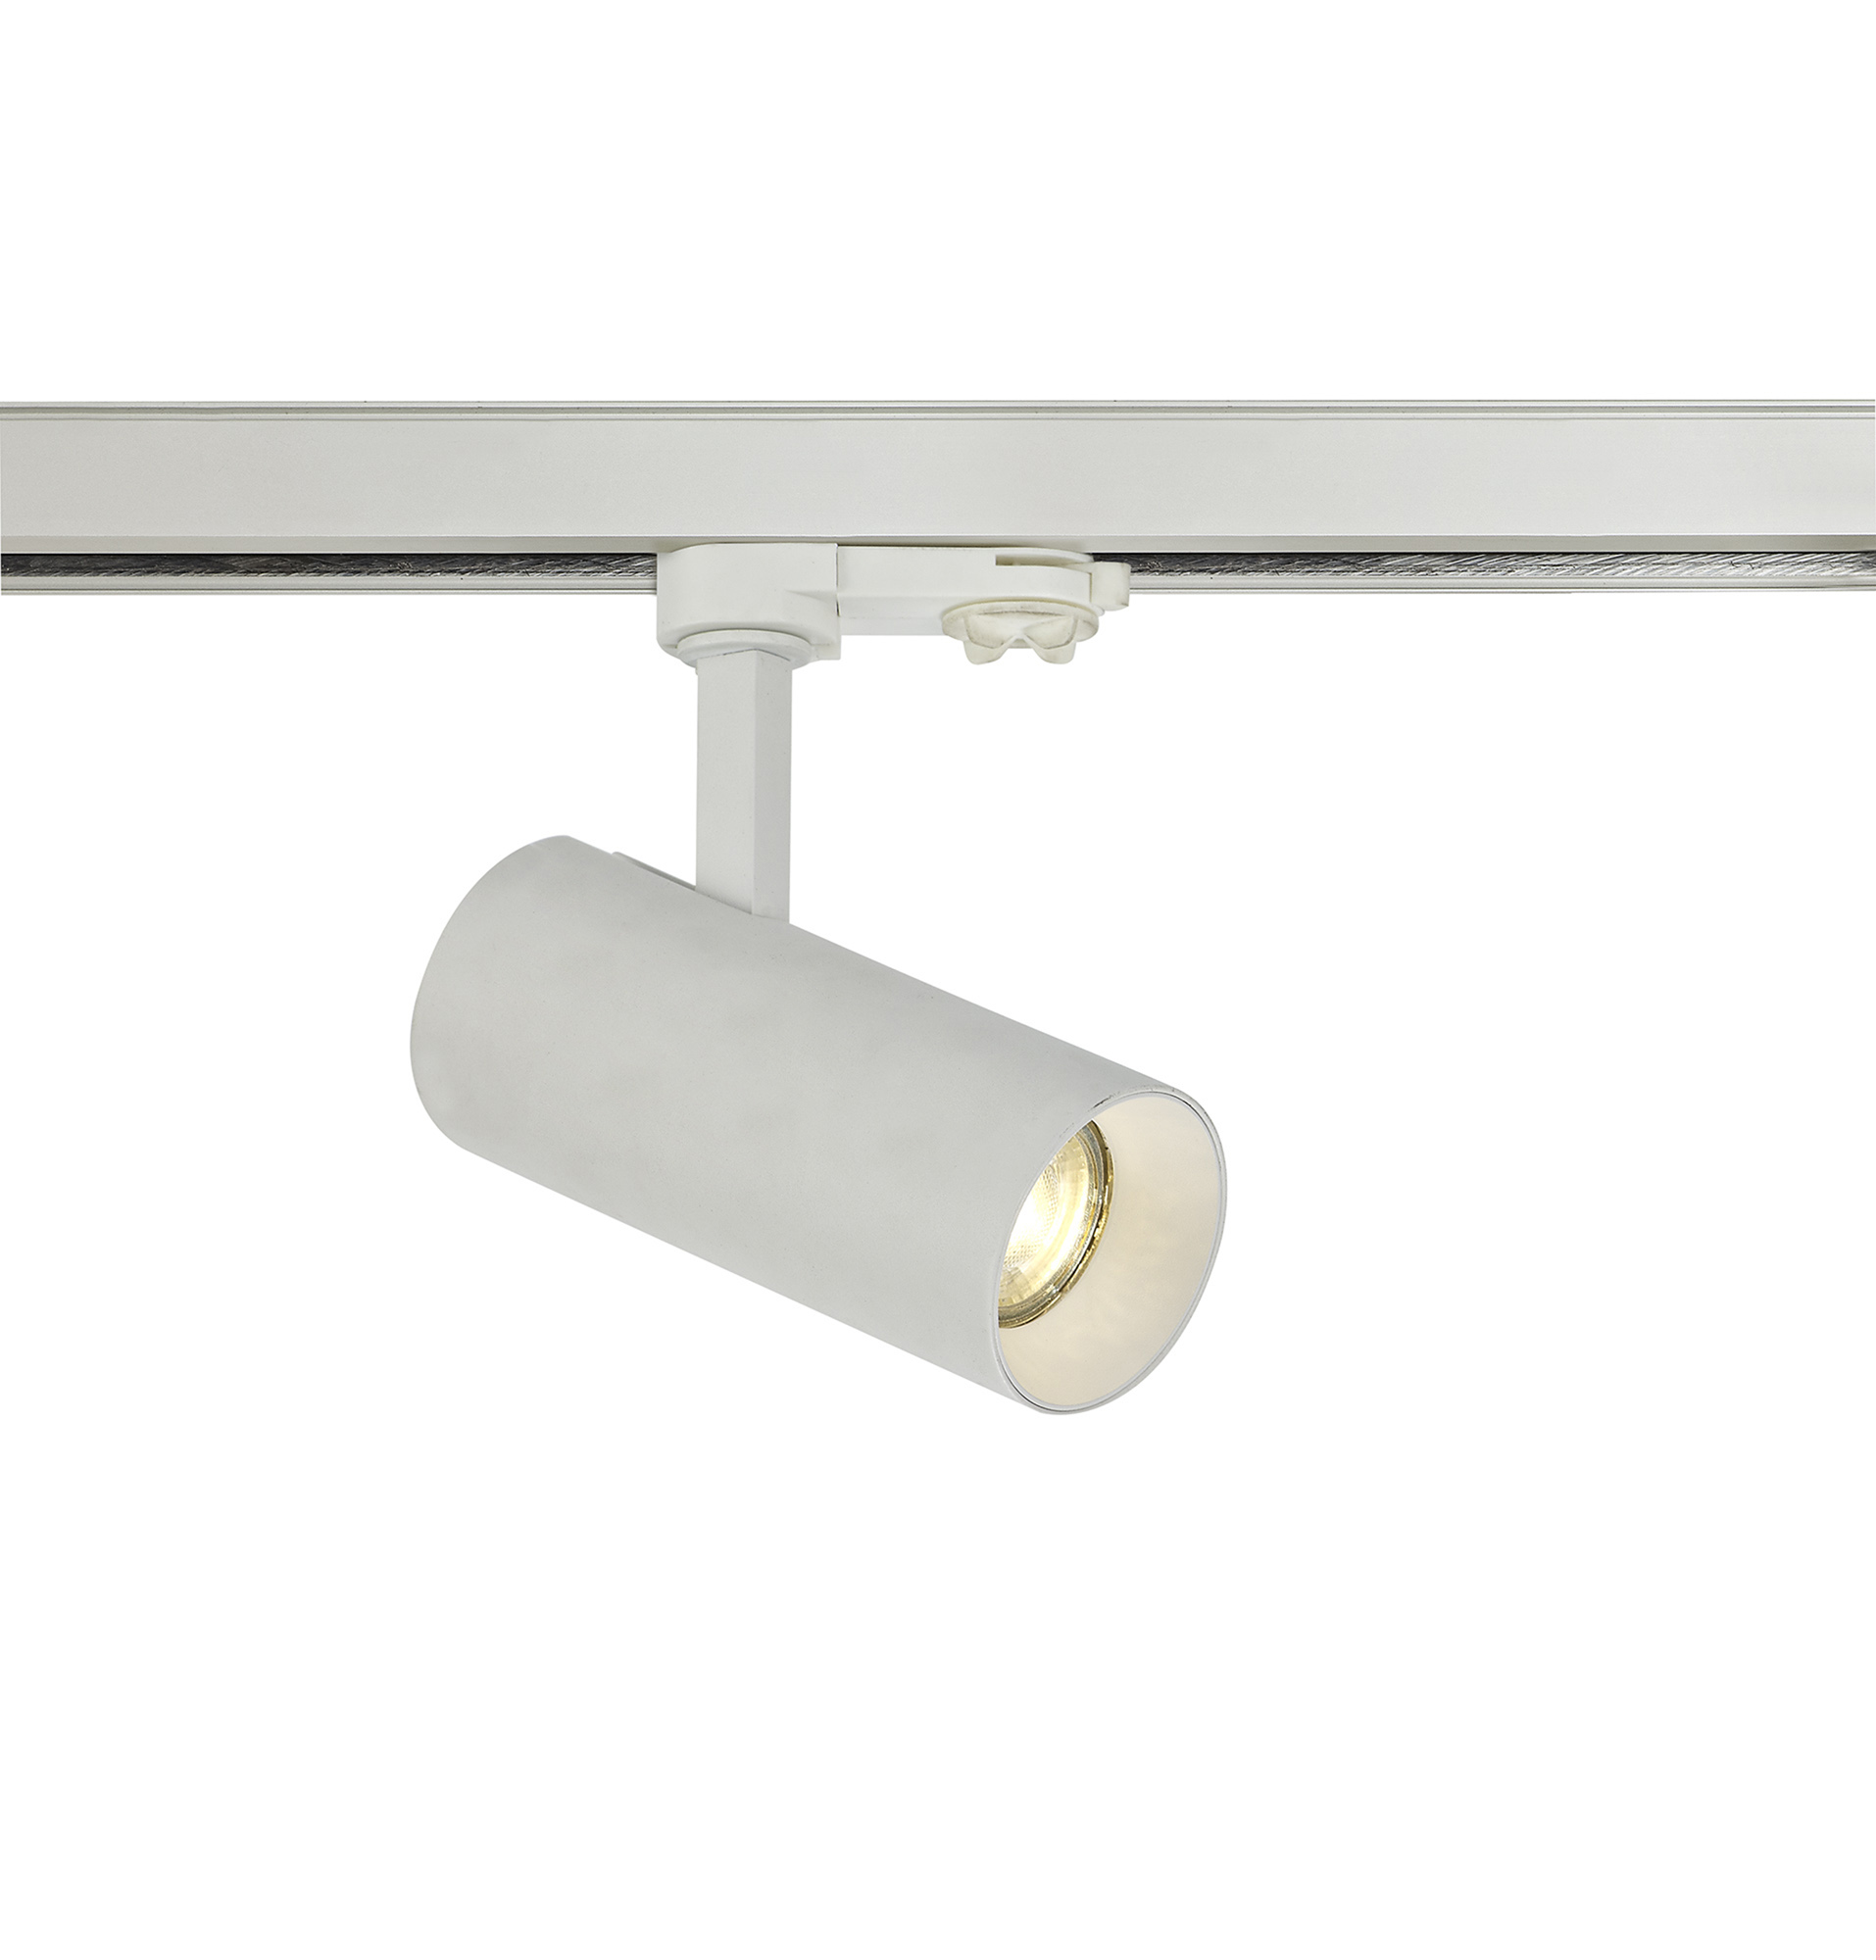 DX160001  Eos T 10; GU10/LED Module; White & White; Cylinder Track Light; 90° Tilt; 350° R/tion; Powergear 3P Adaptor; Push Fit Fast Connector; 5yrs Warranty